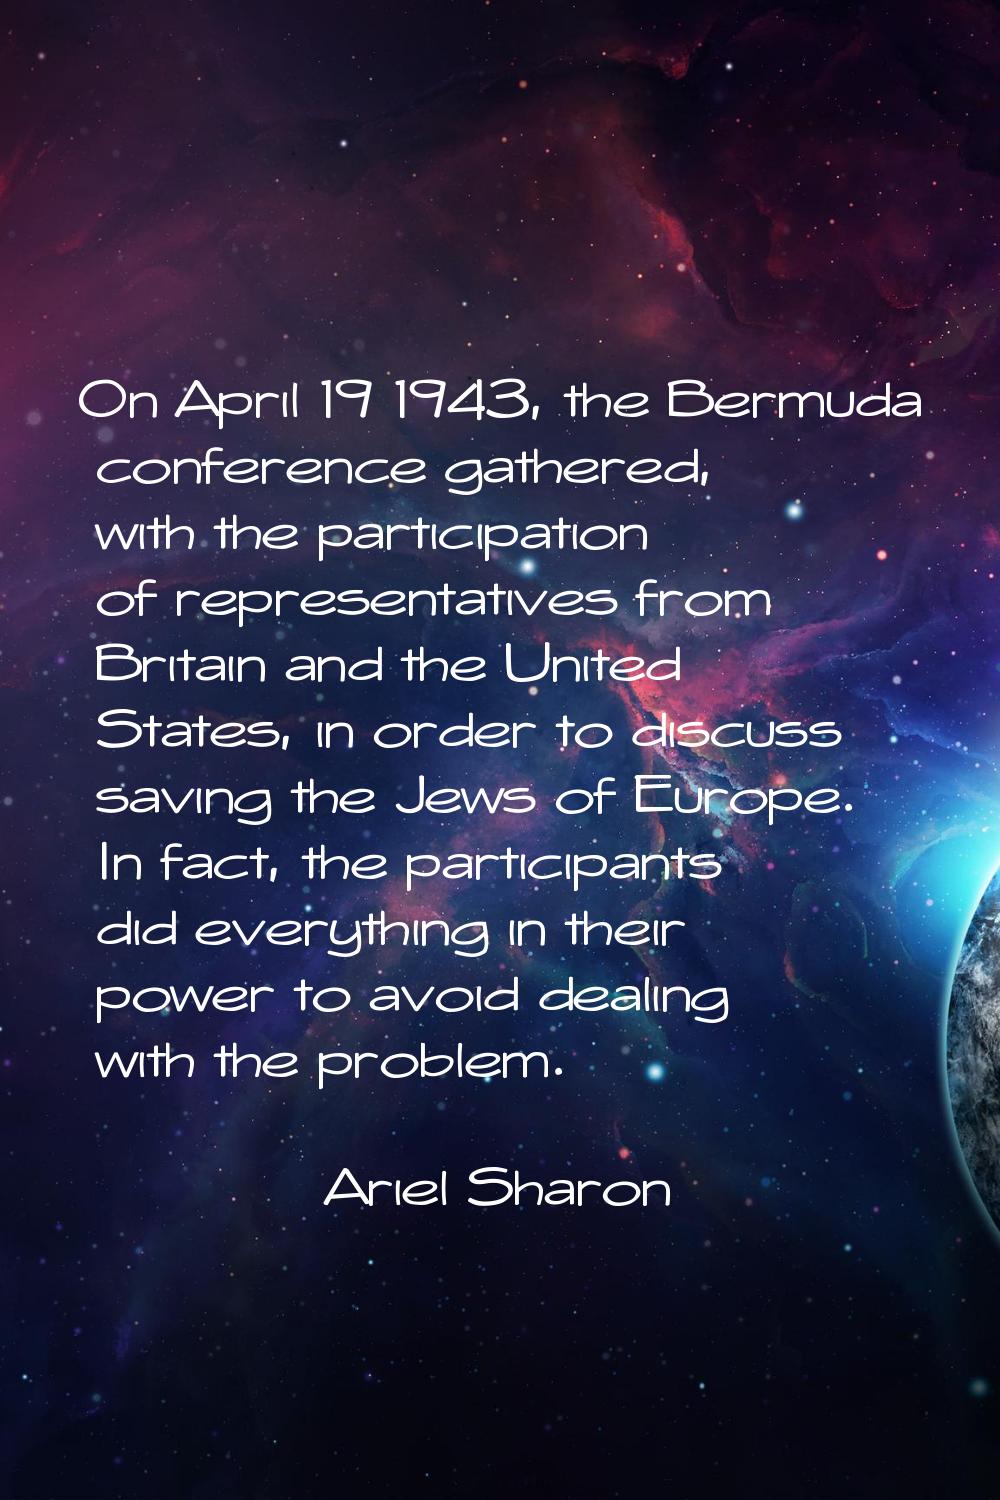 On April 19 1943, the Bermuda conference gathered, with the participation of representatives from B